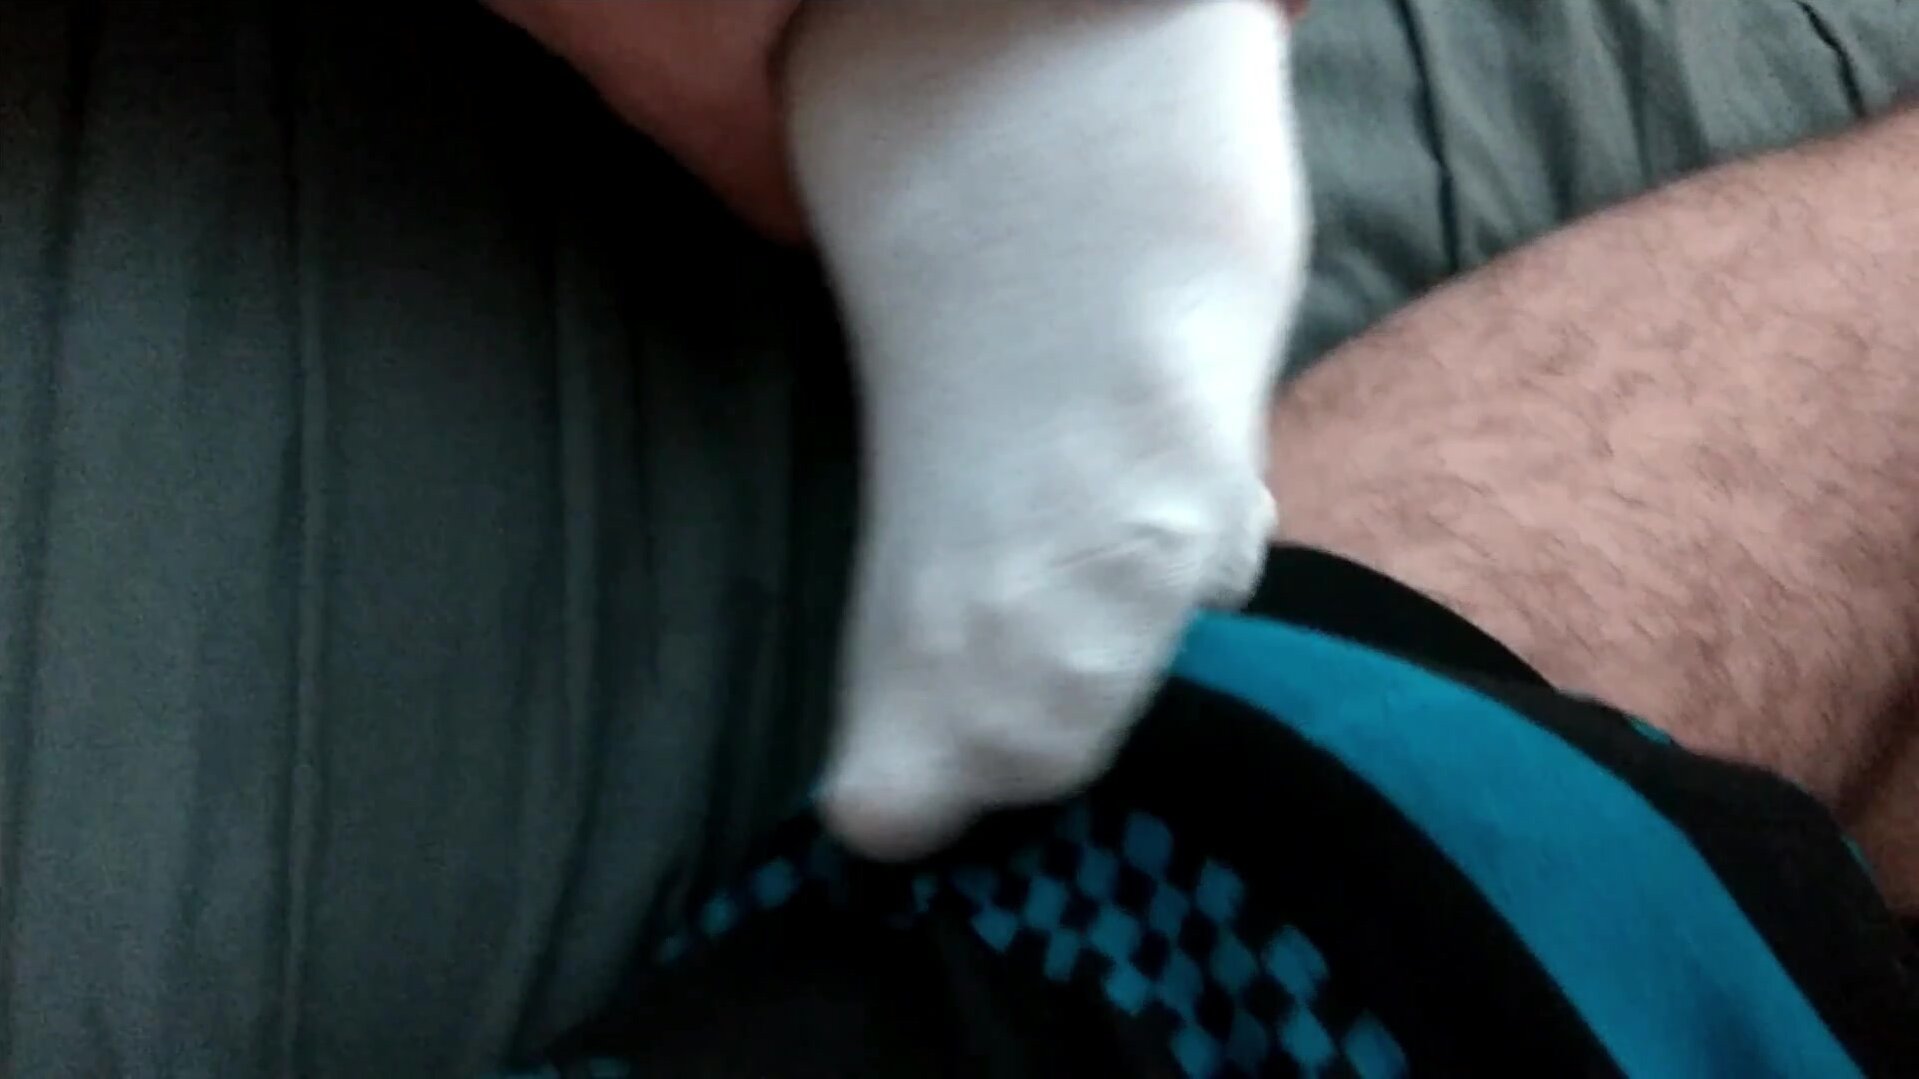 Relieving the boner in the sleeping boy's feet